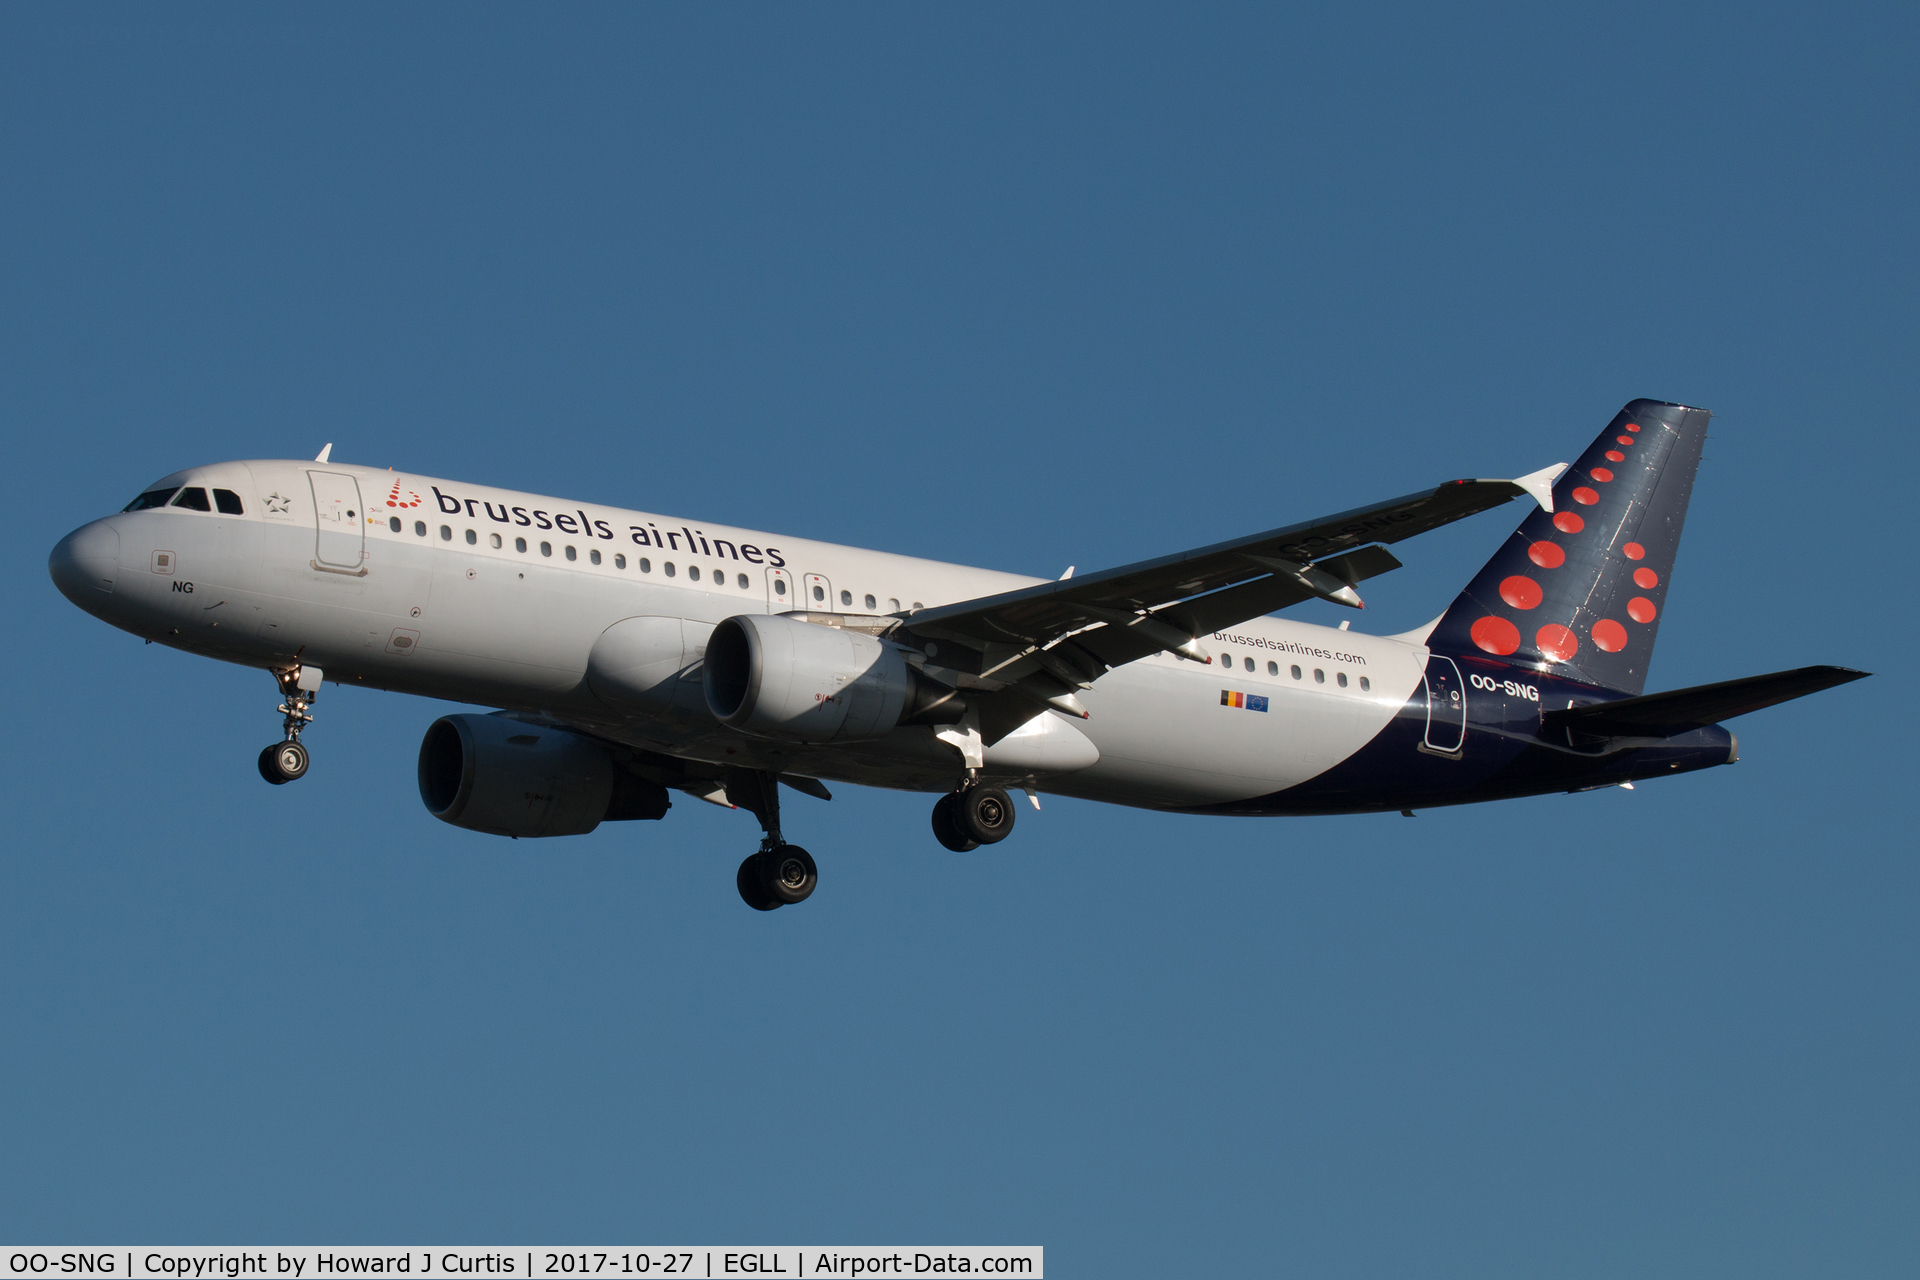 OO-SNG, 2002 Airbus A320-214 C/N 1885, On approach